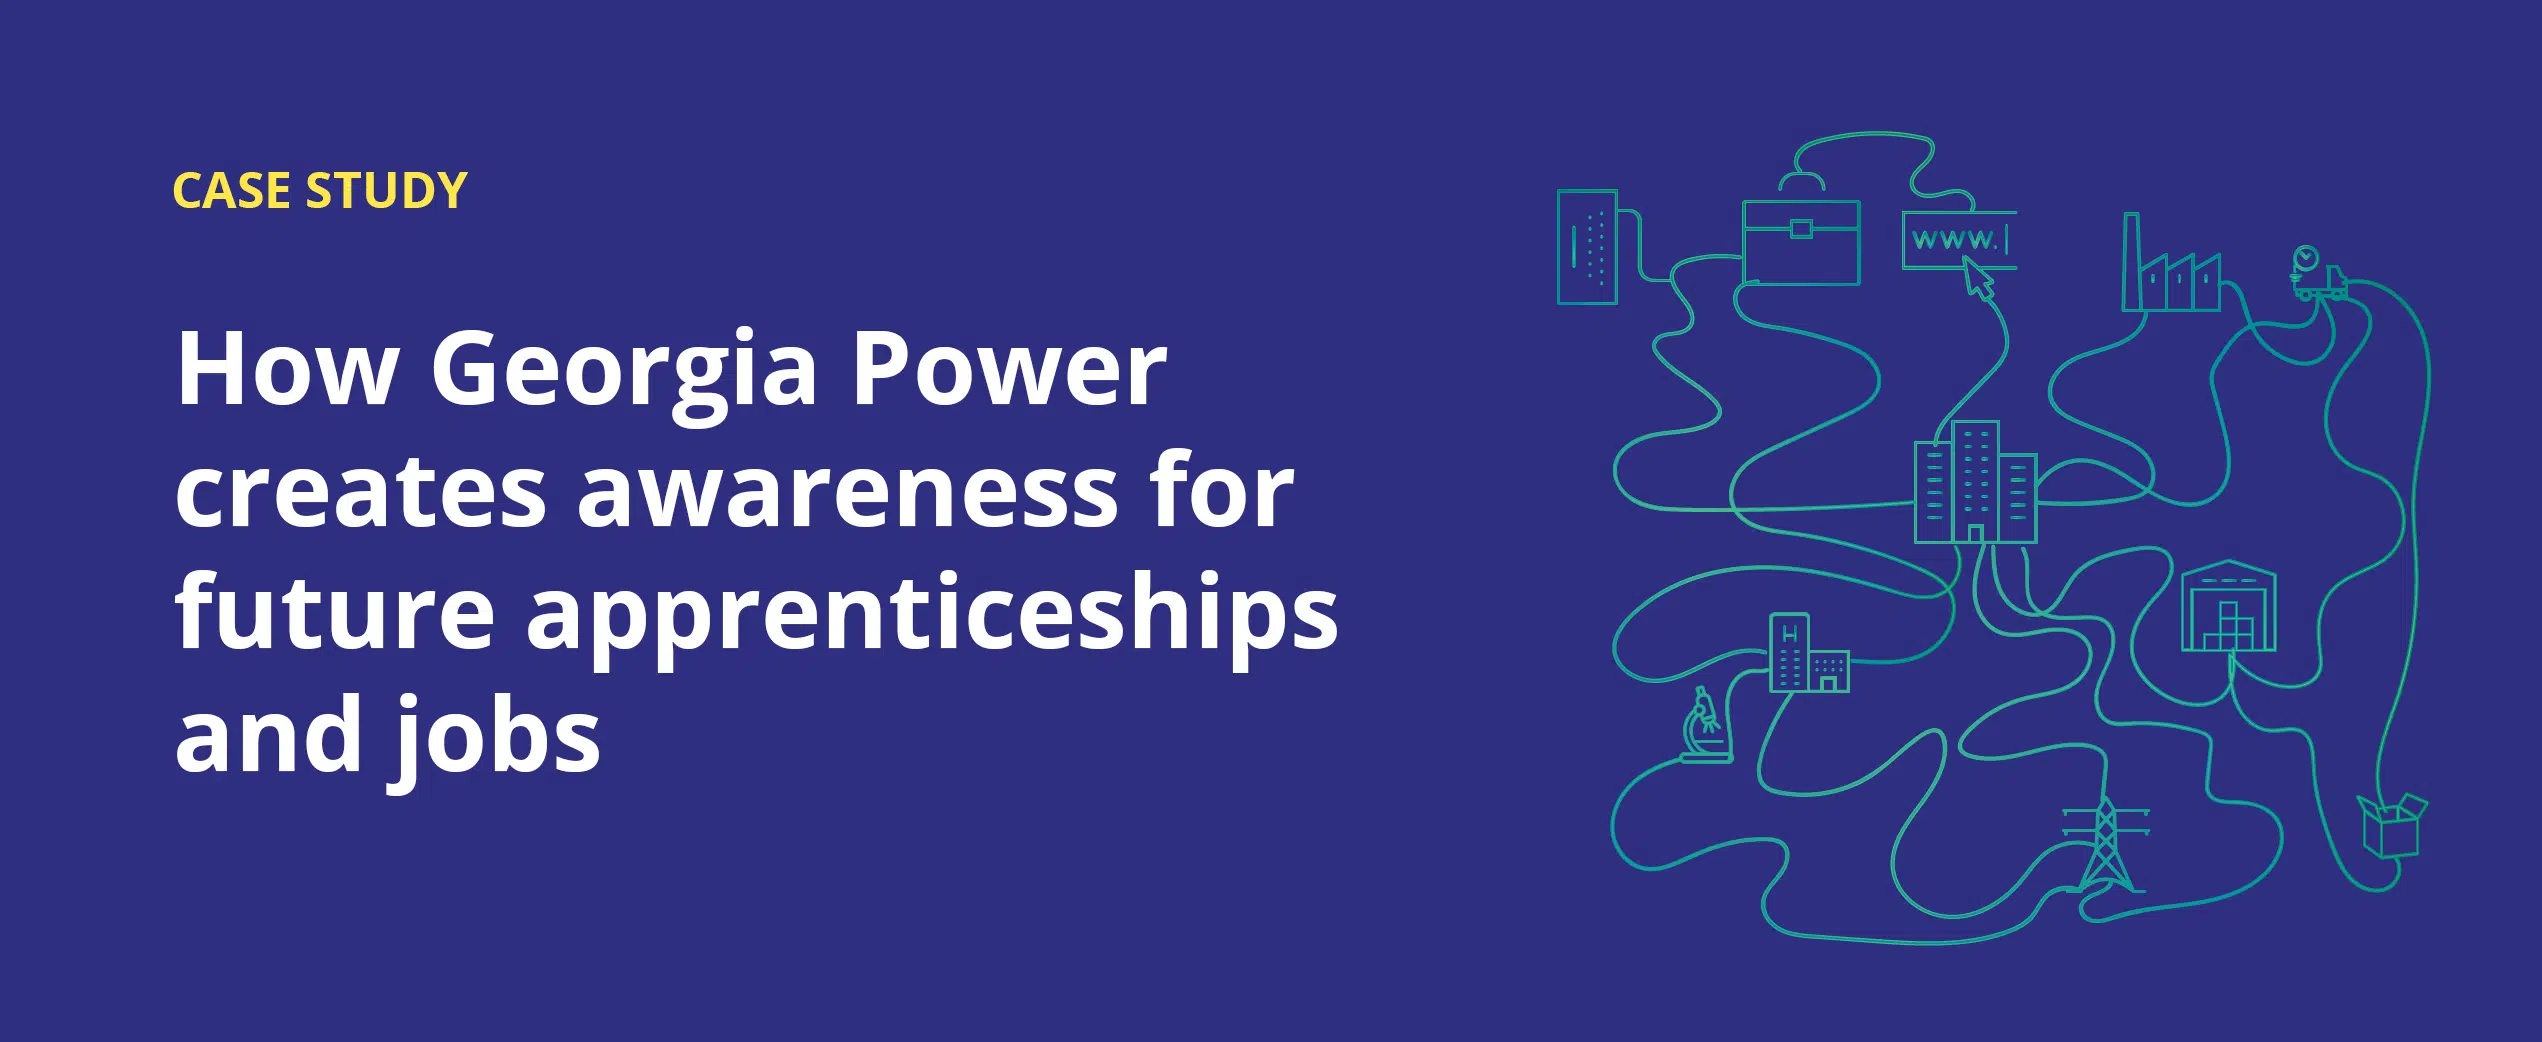 How Georgia Power creates awareness for future apprenticeships and jobs graphic